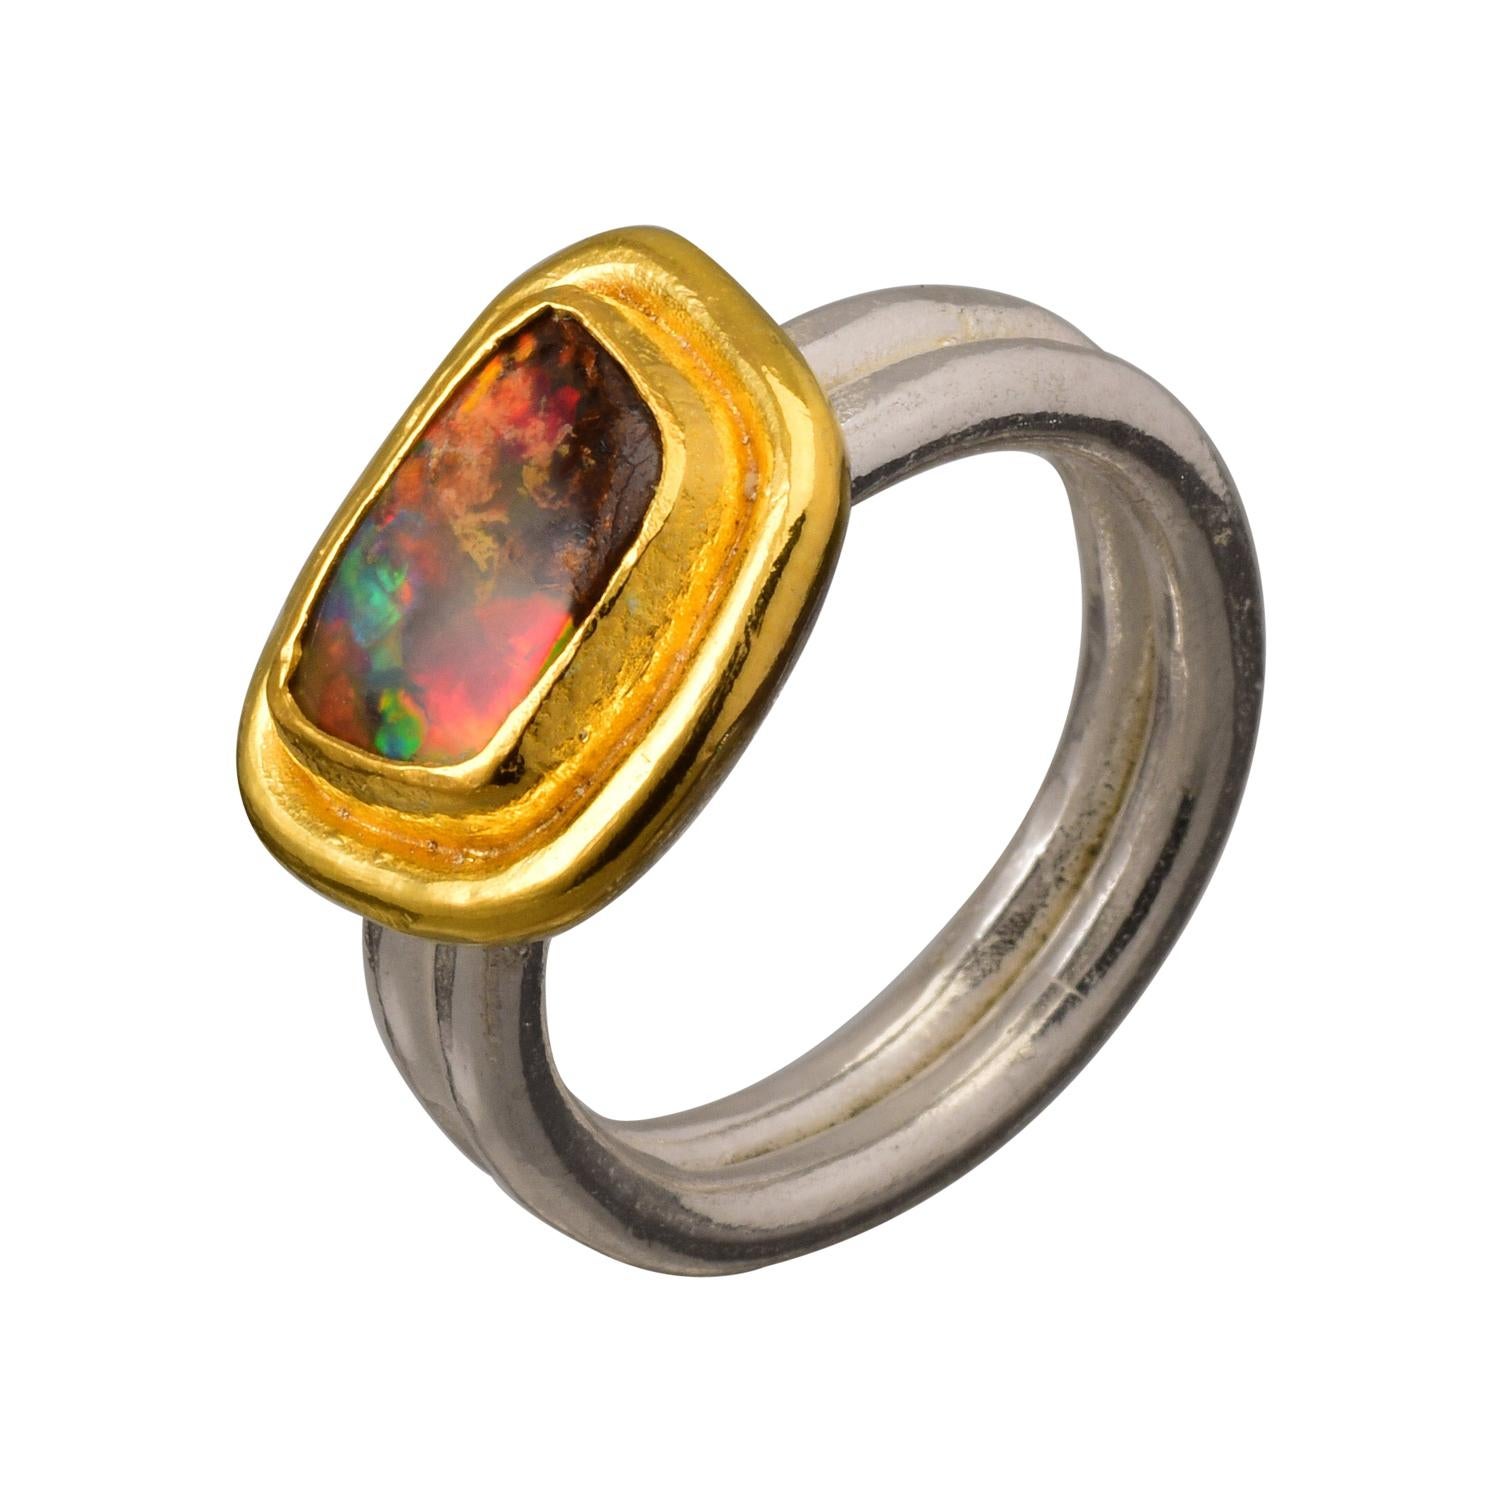 Boulder Opal Ring in 22 Karat Yellow Gold and Silver